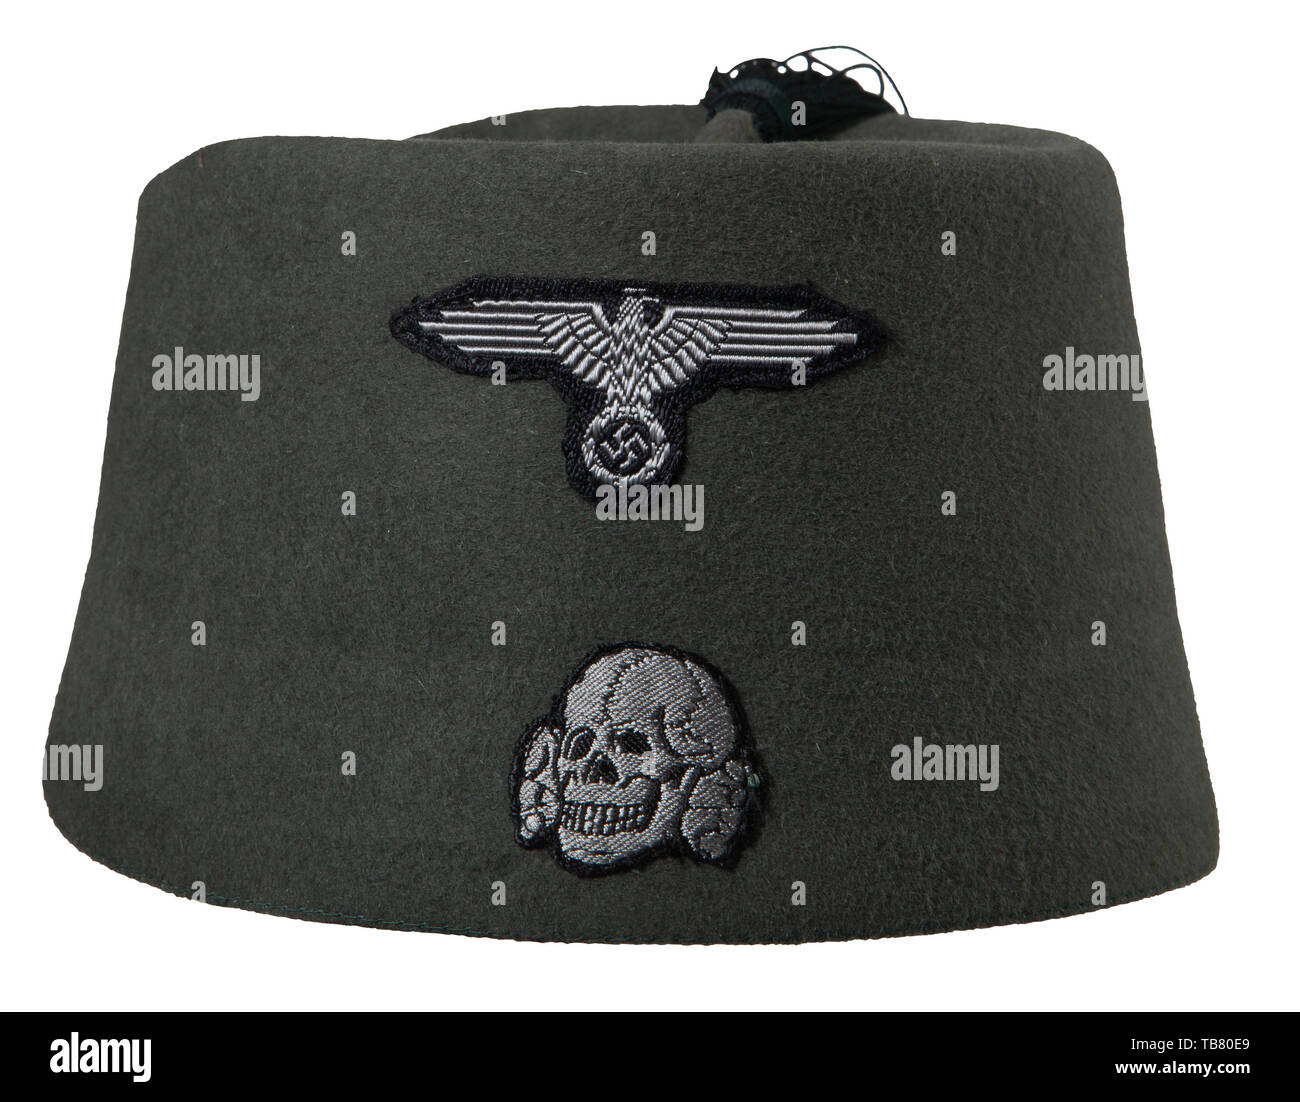 THE JOHN PEPERA COLLECTION, A Fez of the Waffen SS, Green-grey wool body with dark green tassel still tacked in rear, machine applied BeVo insignia, black leather sweatband and black ink stamped size "57"., Editorial-Use-Only Stock Photo